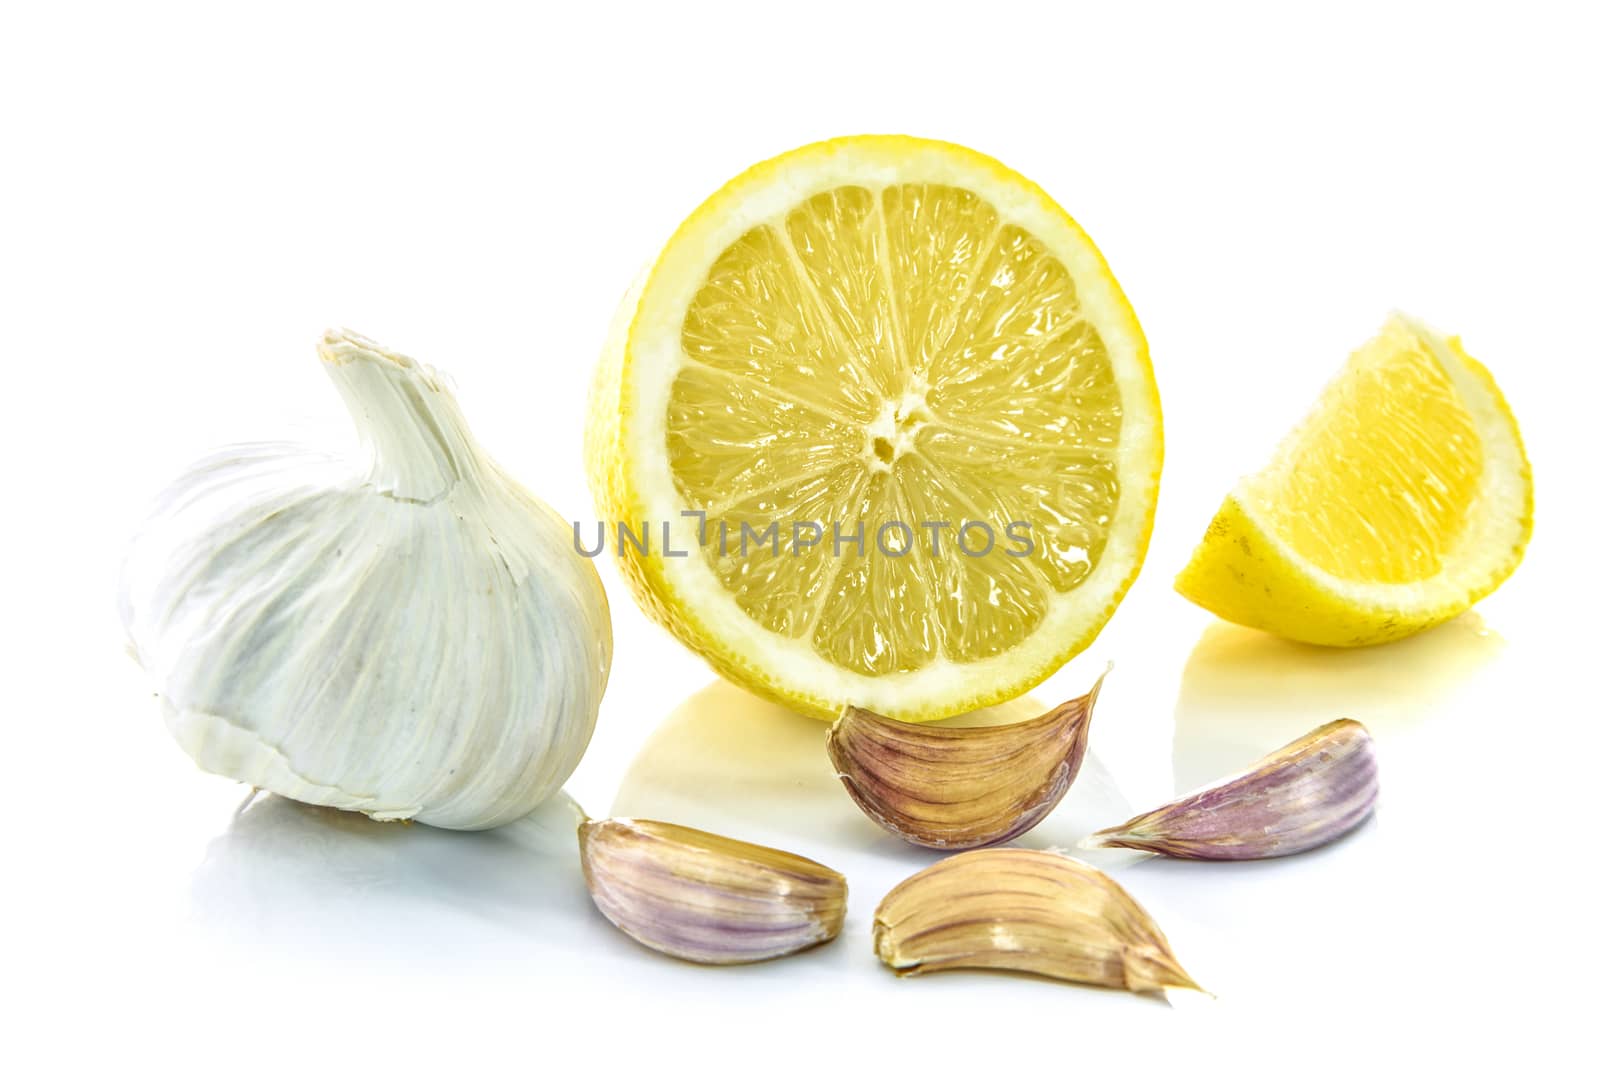 Garlic bulb and clove with sliced lemon isolated on a white background